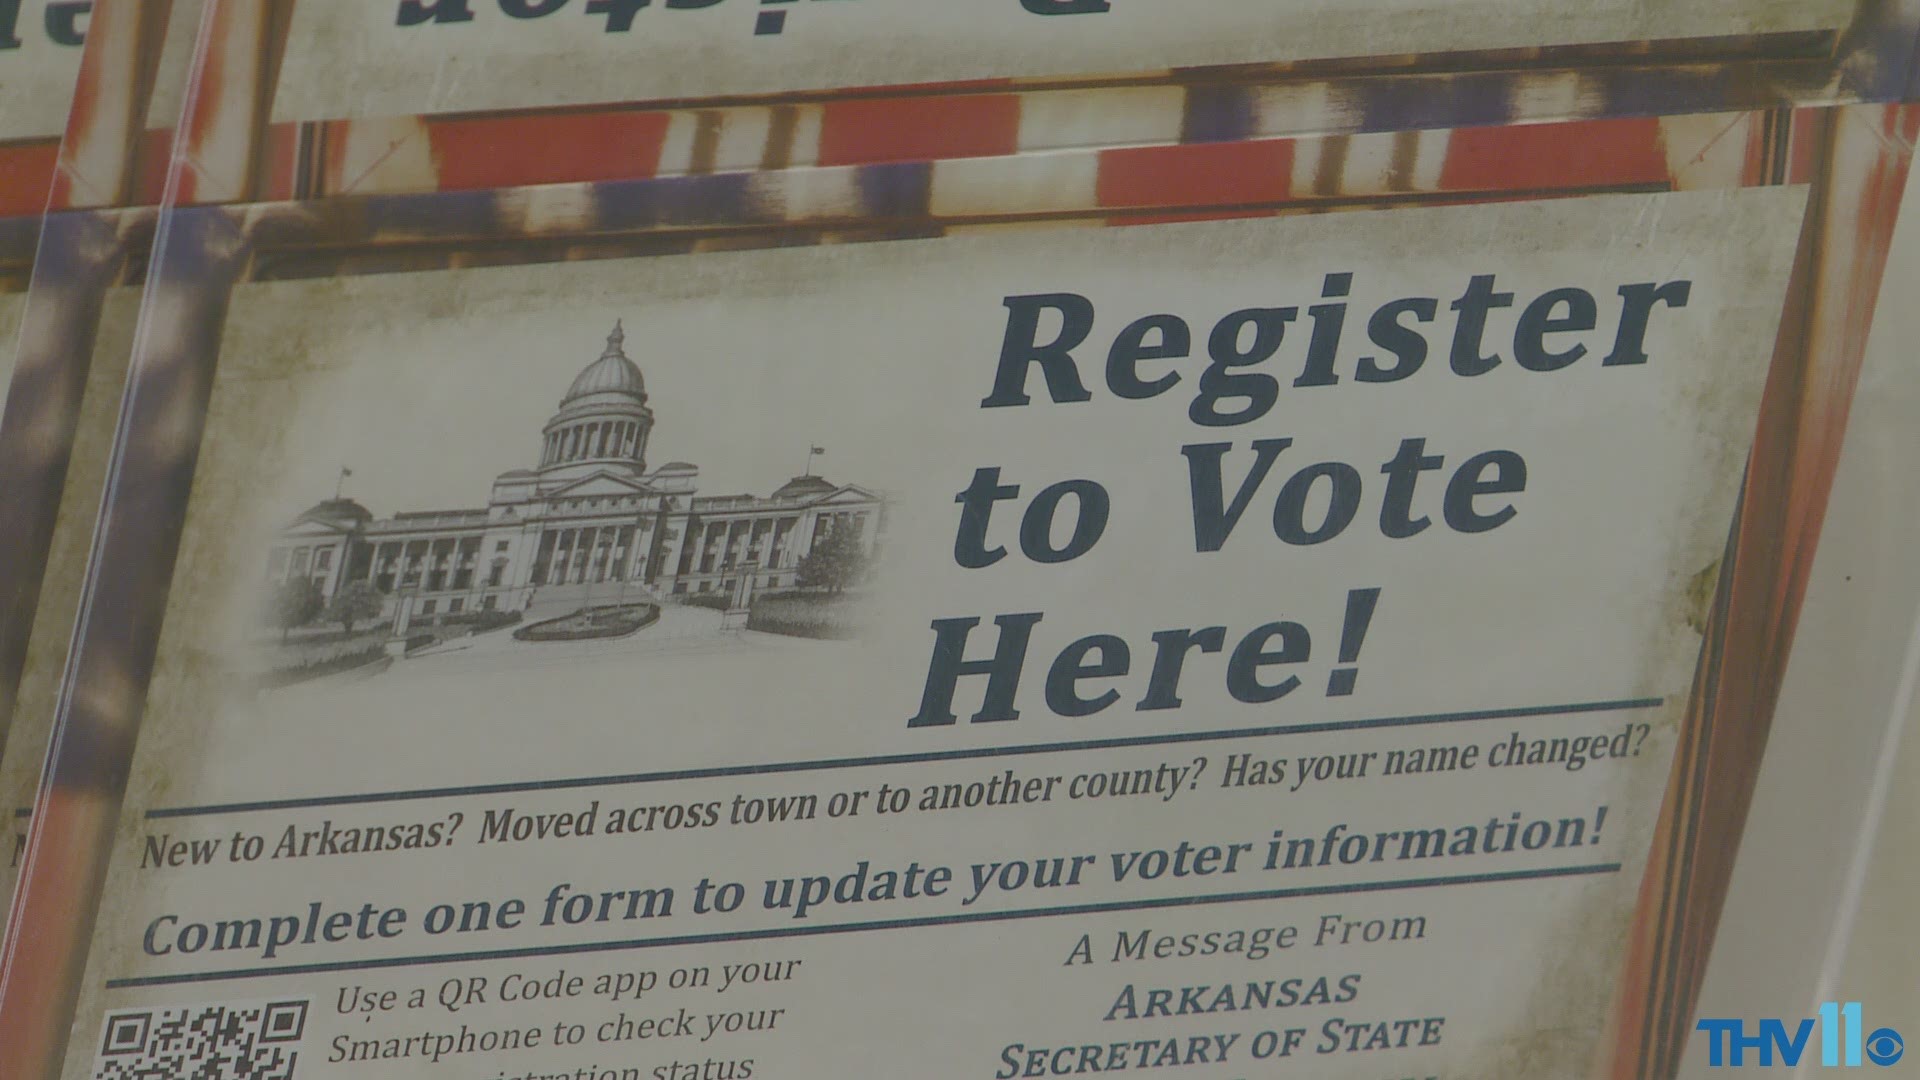 Dozens of states across the country are successfully using online voter registration, yet Arkansas isn't one of them. While the deadline to register has passed, some still want to know why an online system hasn't been implemented.